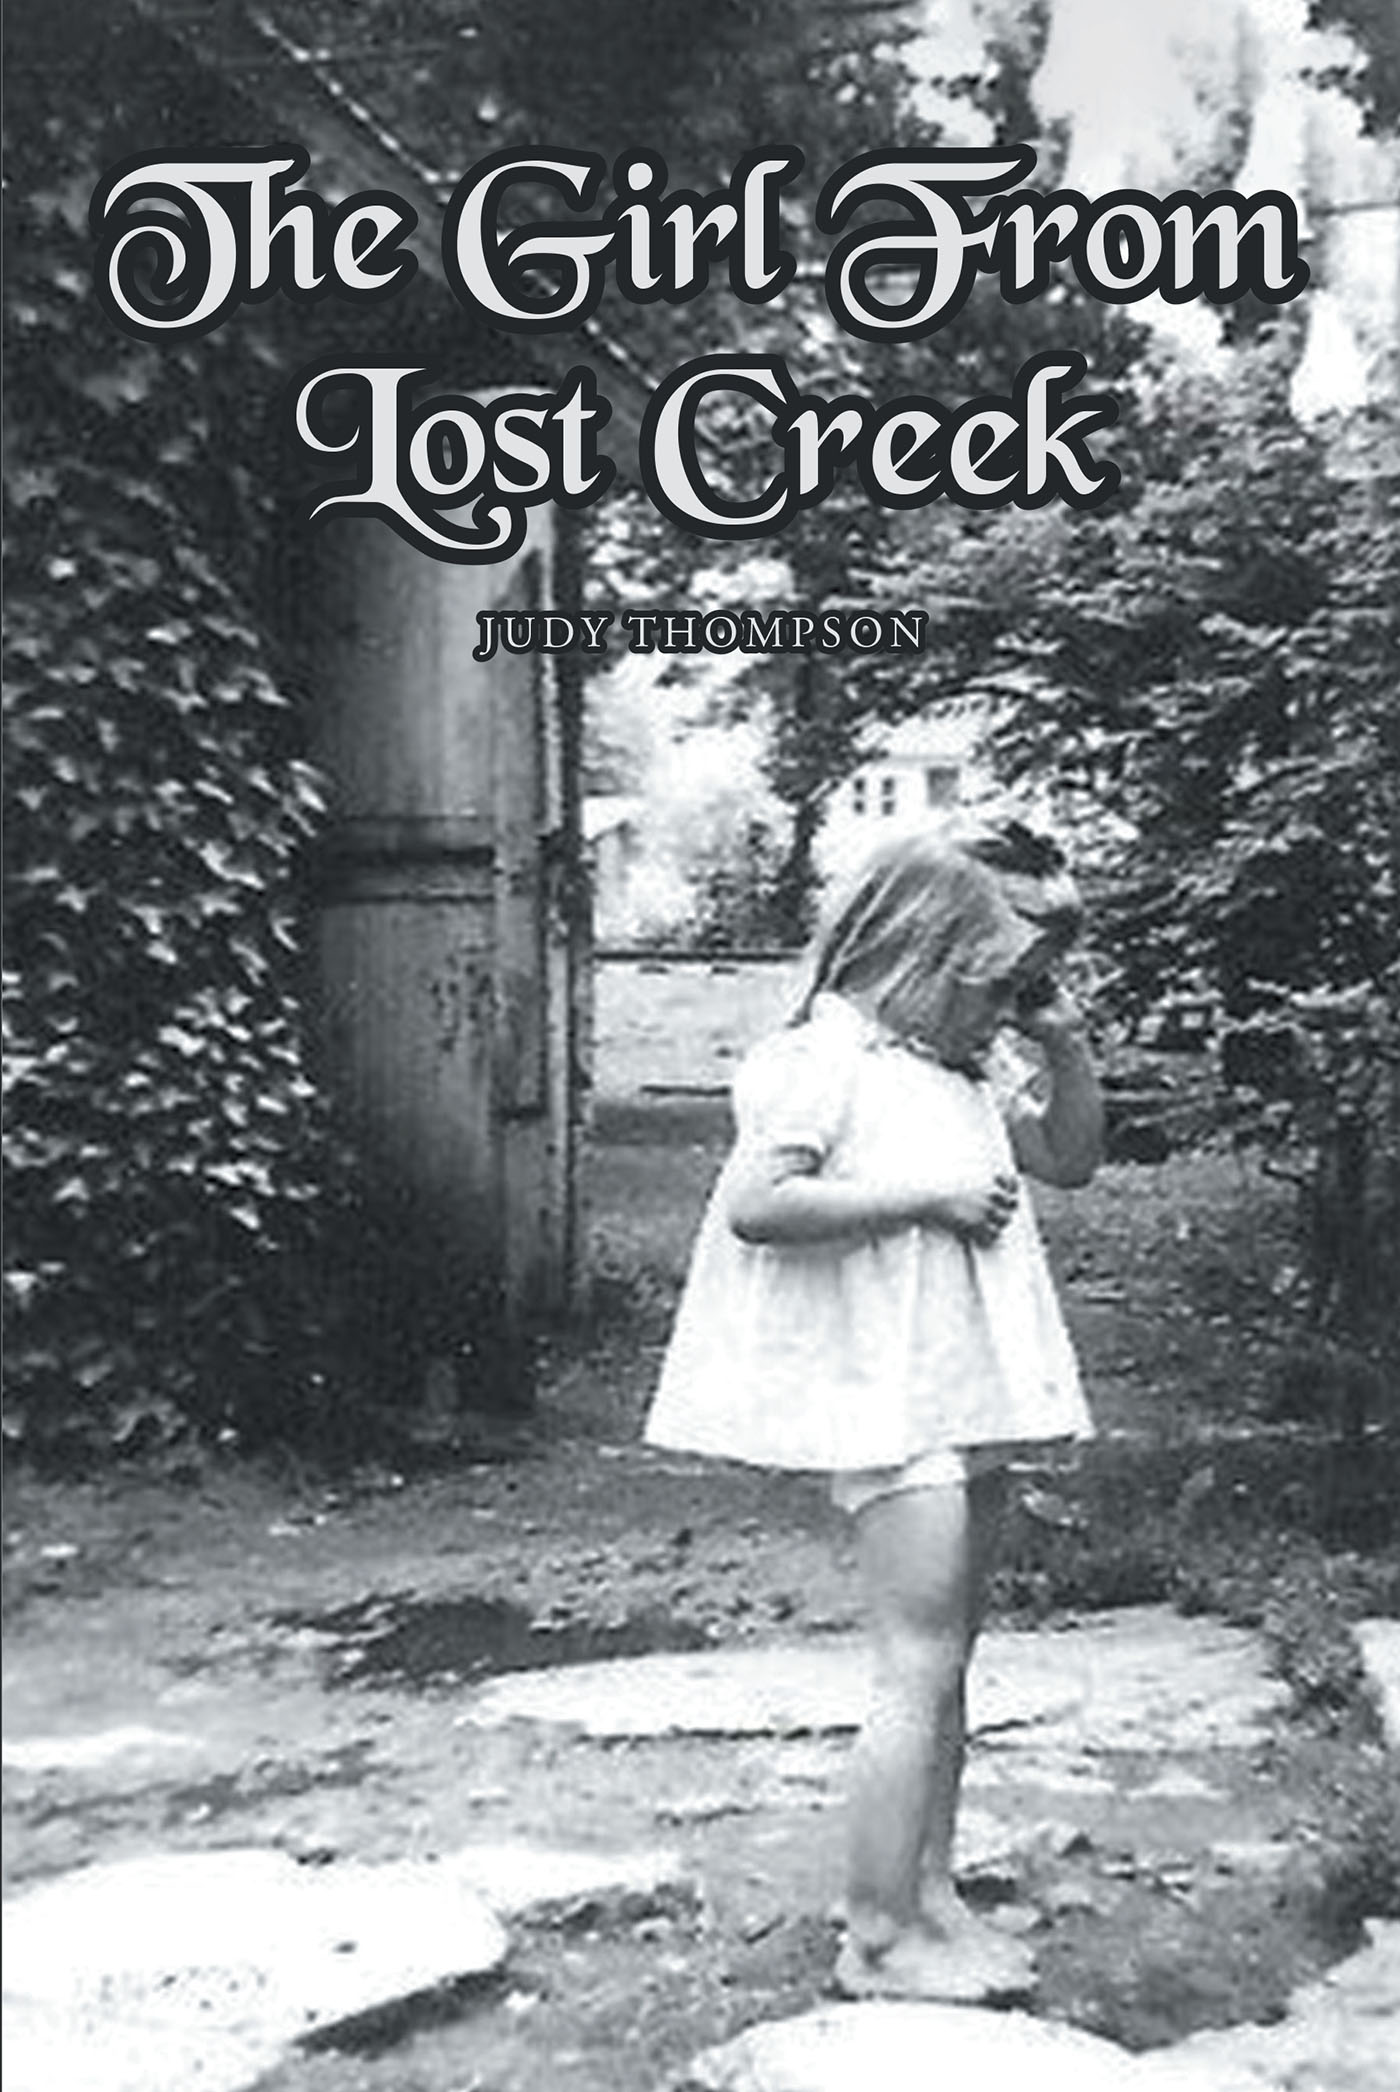 Author Judy Thompson’s New Book, "The Girl from Lost Creek," is a Poignant Account of the Author's Fascinating Life Story and All She Managed to Overcome